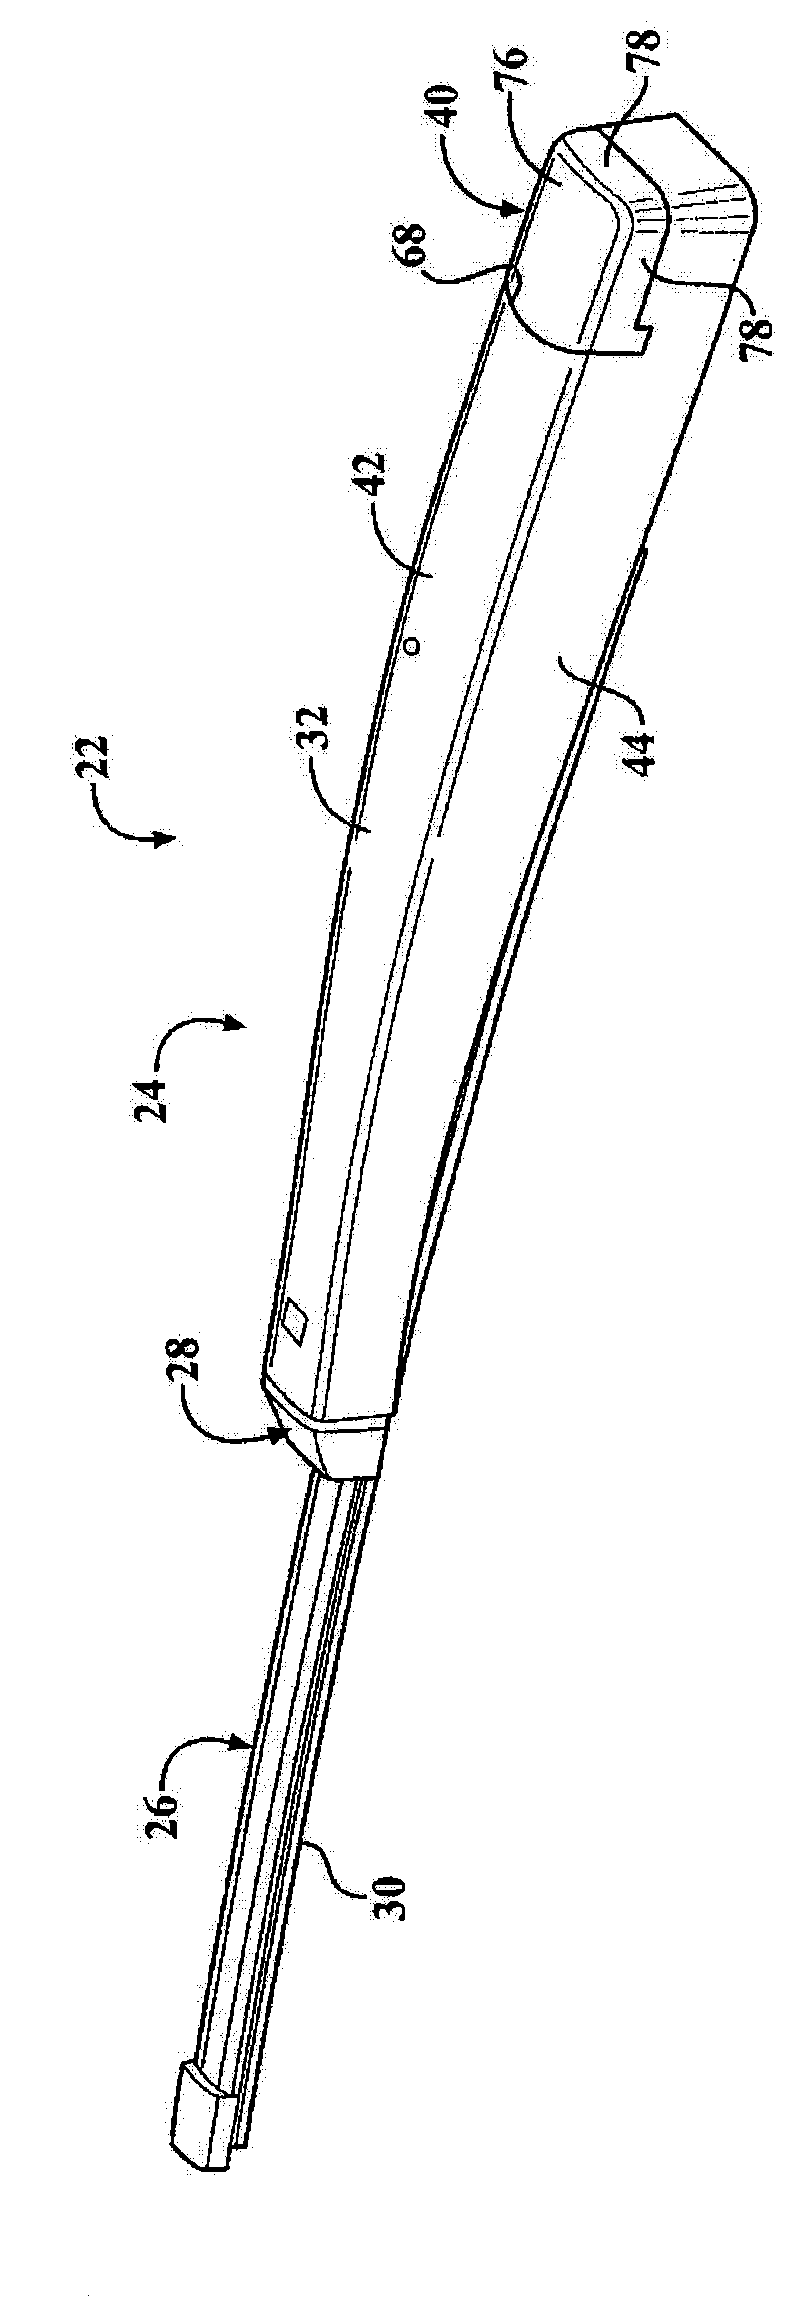 Wiper arm having swivel cover allowing access to the head and pivot shaft